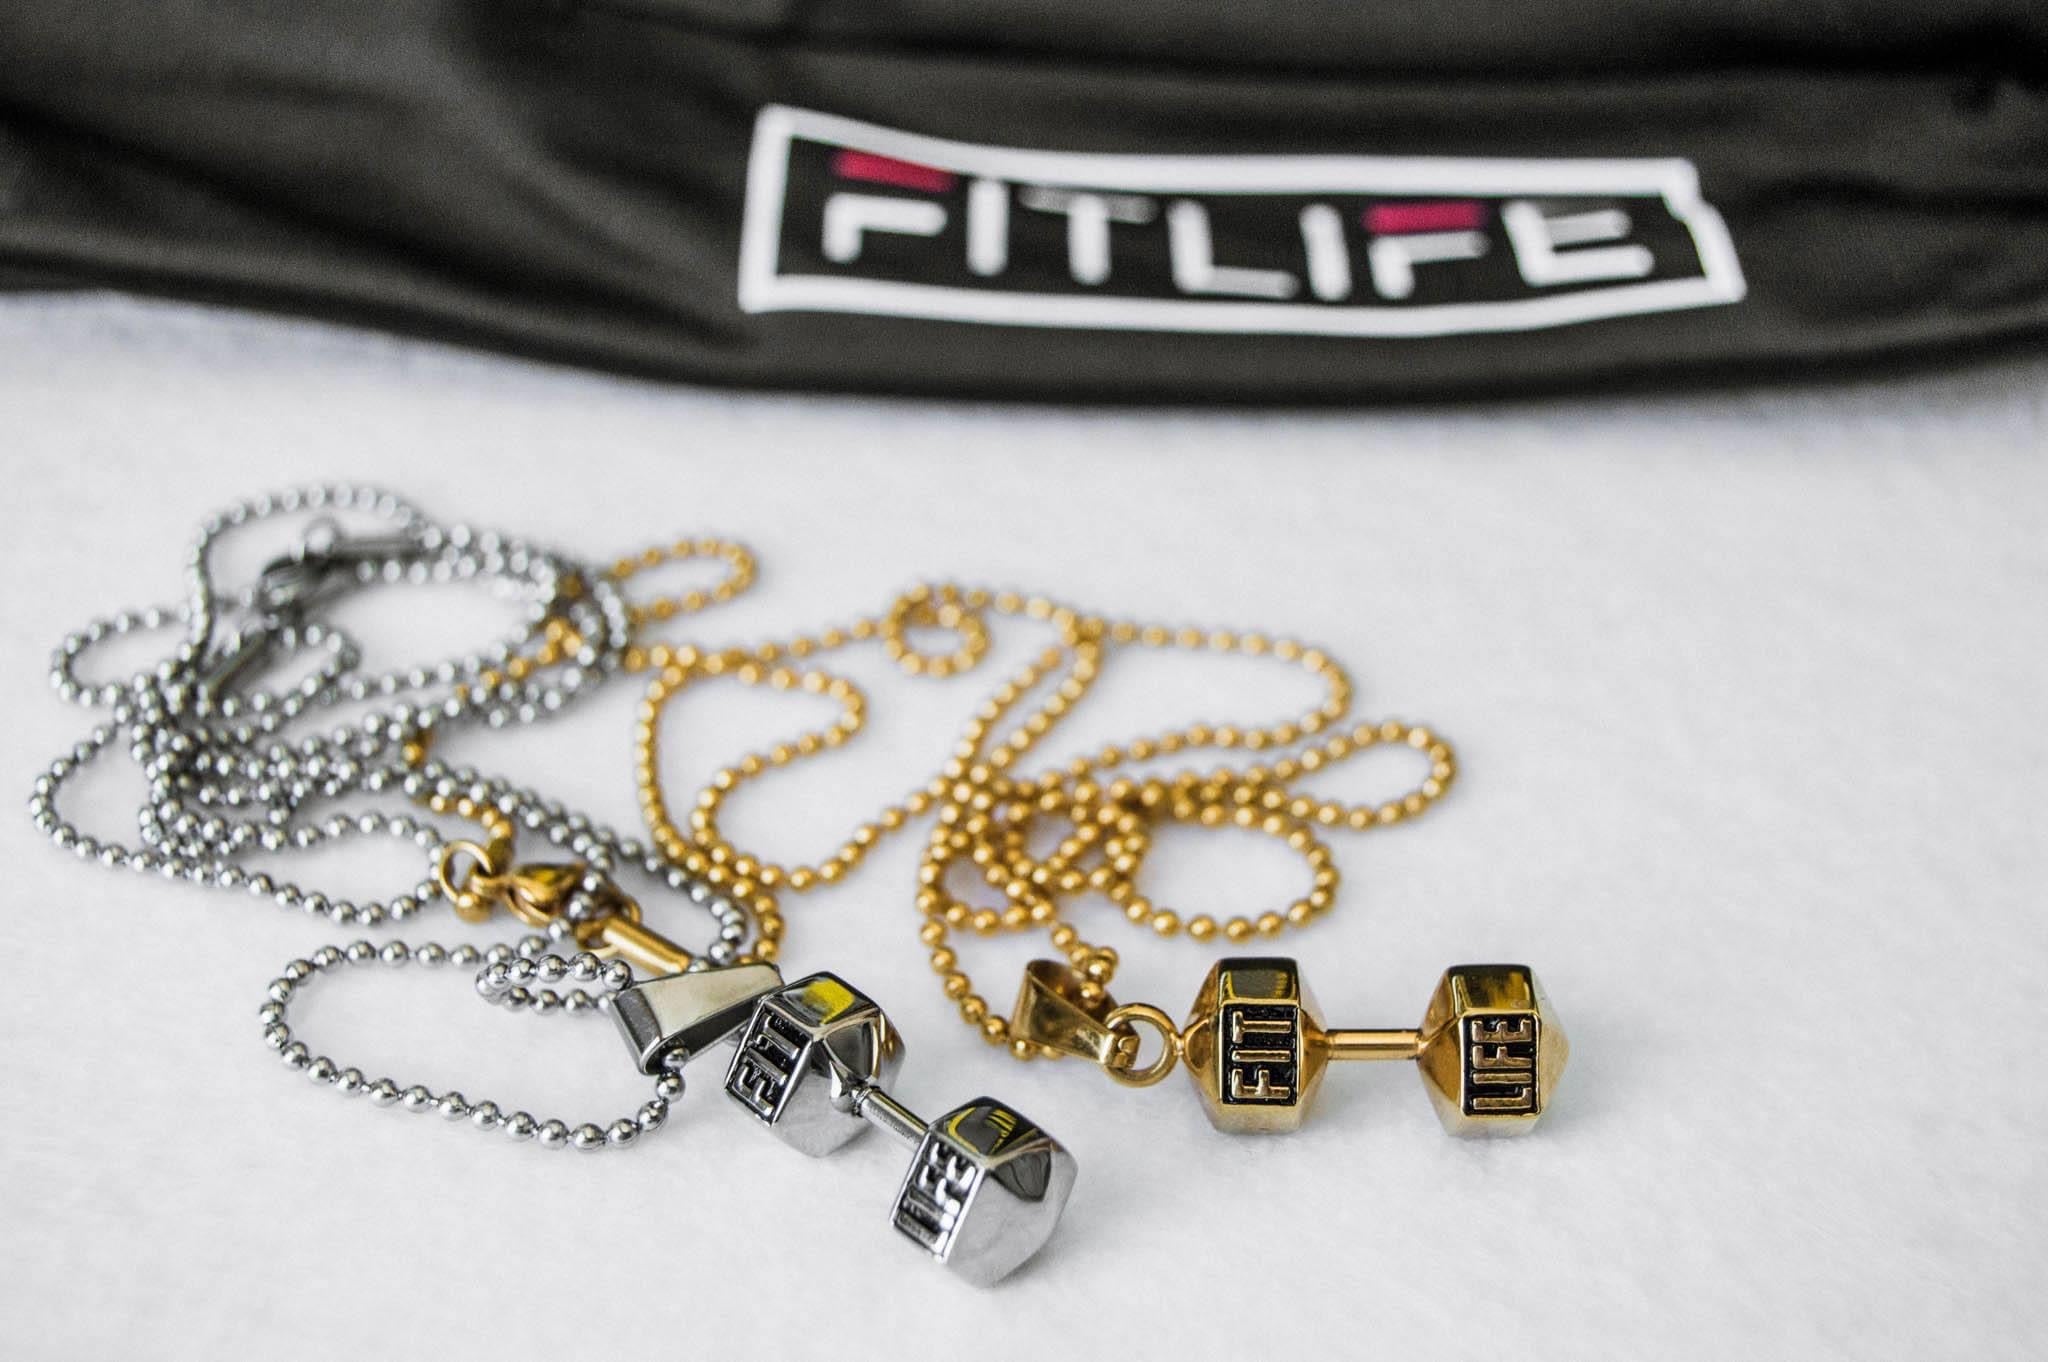 Silver X Gold Dumbbell Necklaces Pack